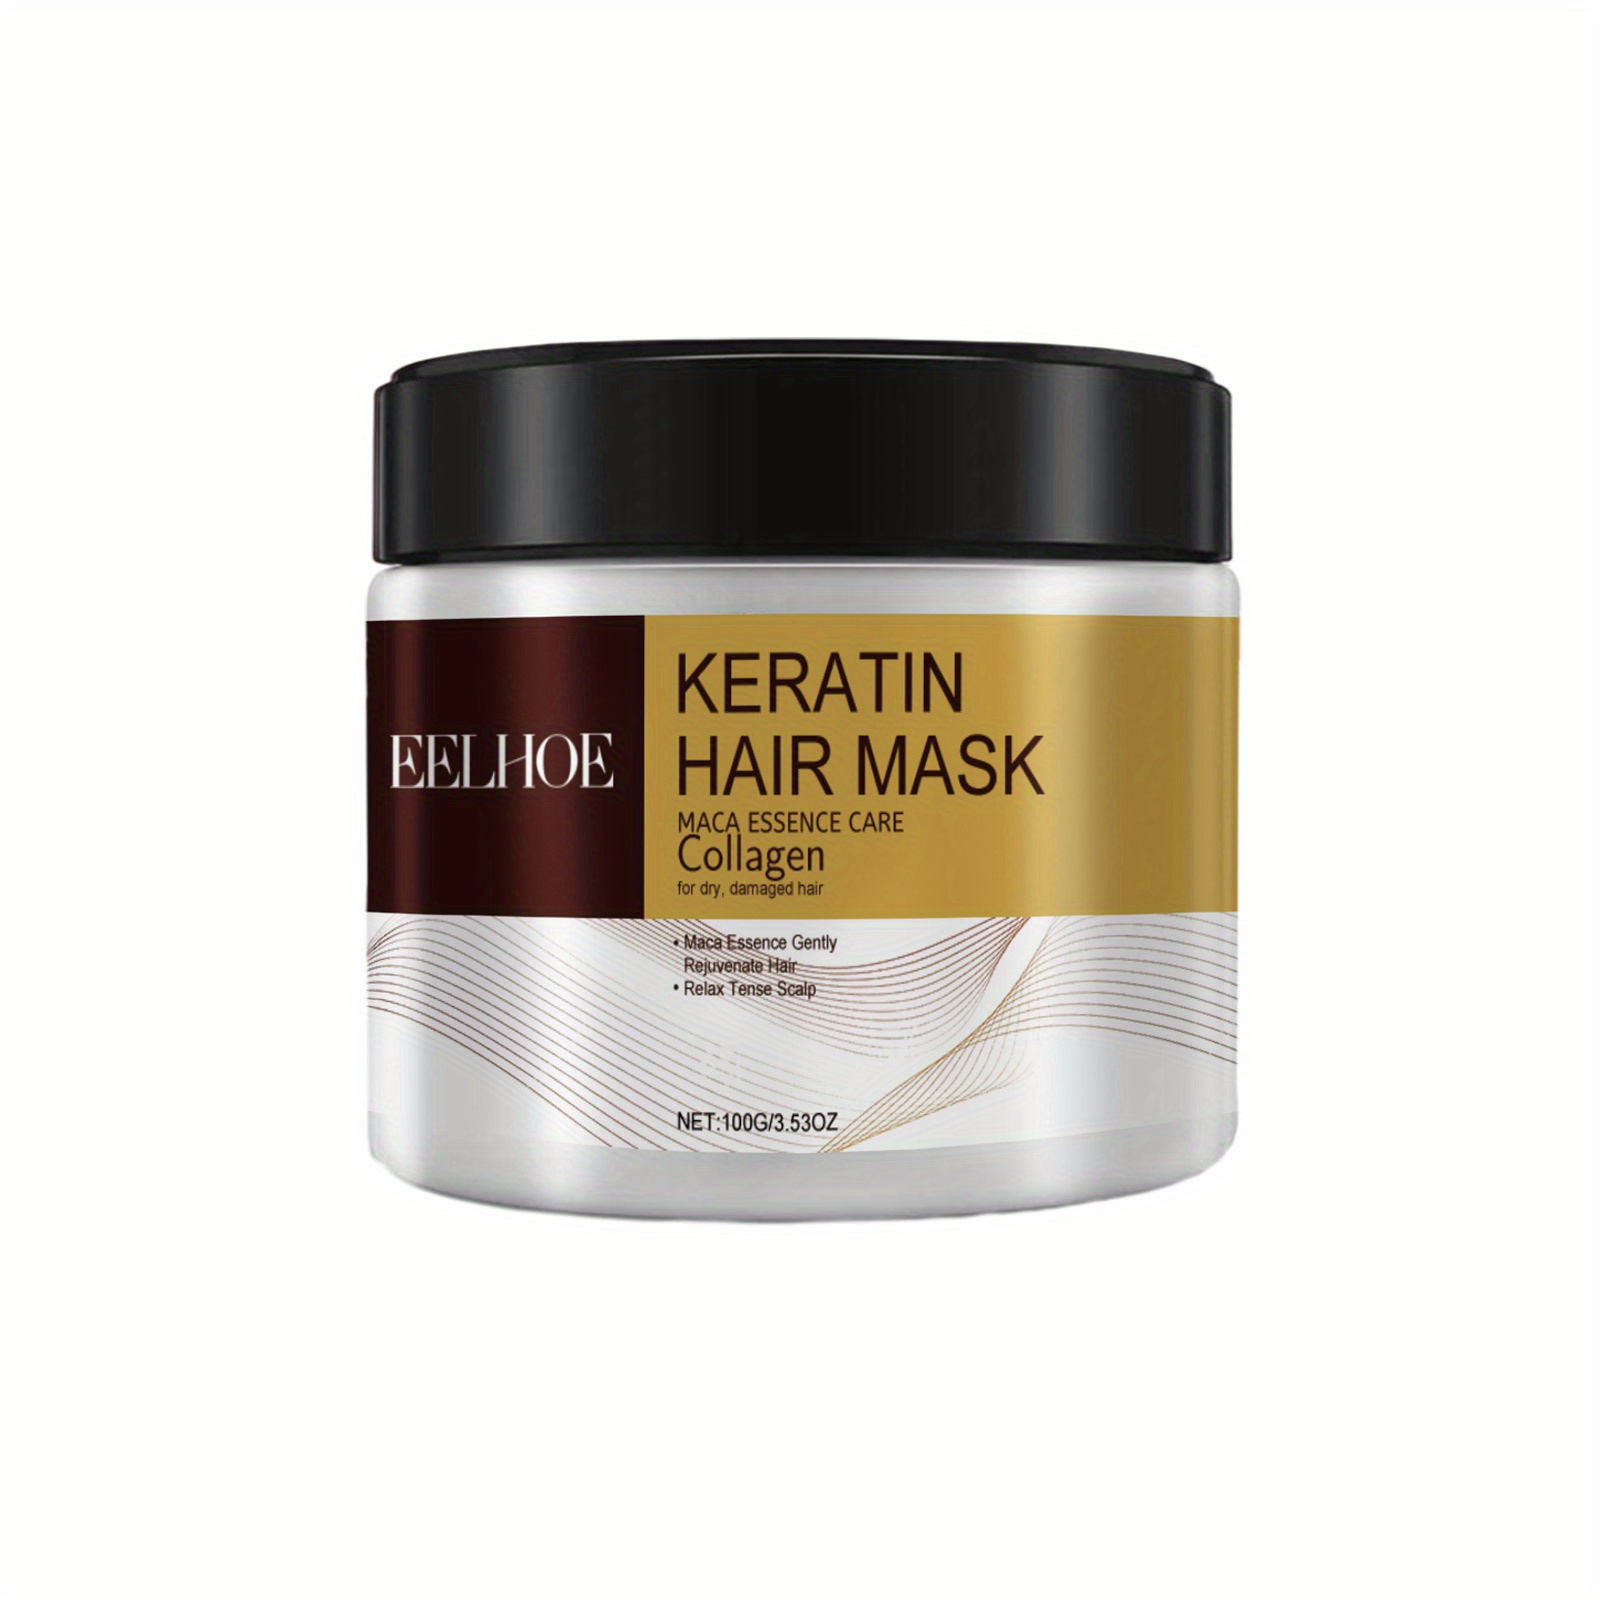 

Eelhoe Maca Keratin Hair Mask With Collagen, 3.53oz - Intensive Deep Moisturizing And Strengthening Treatment For Normal Hair, Restores Youthful Texture And Luster